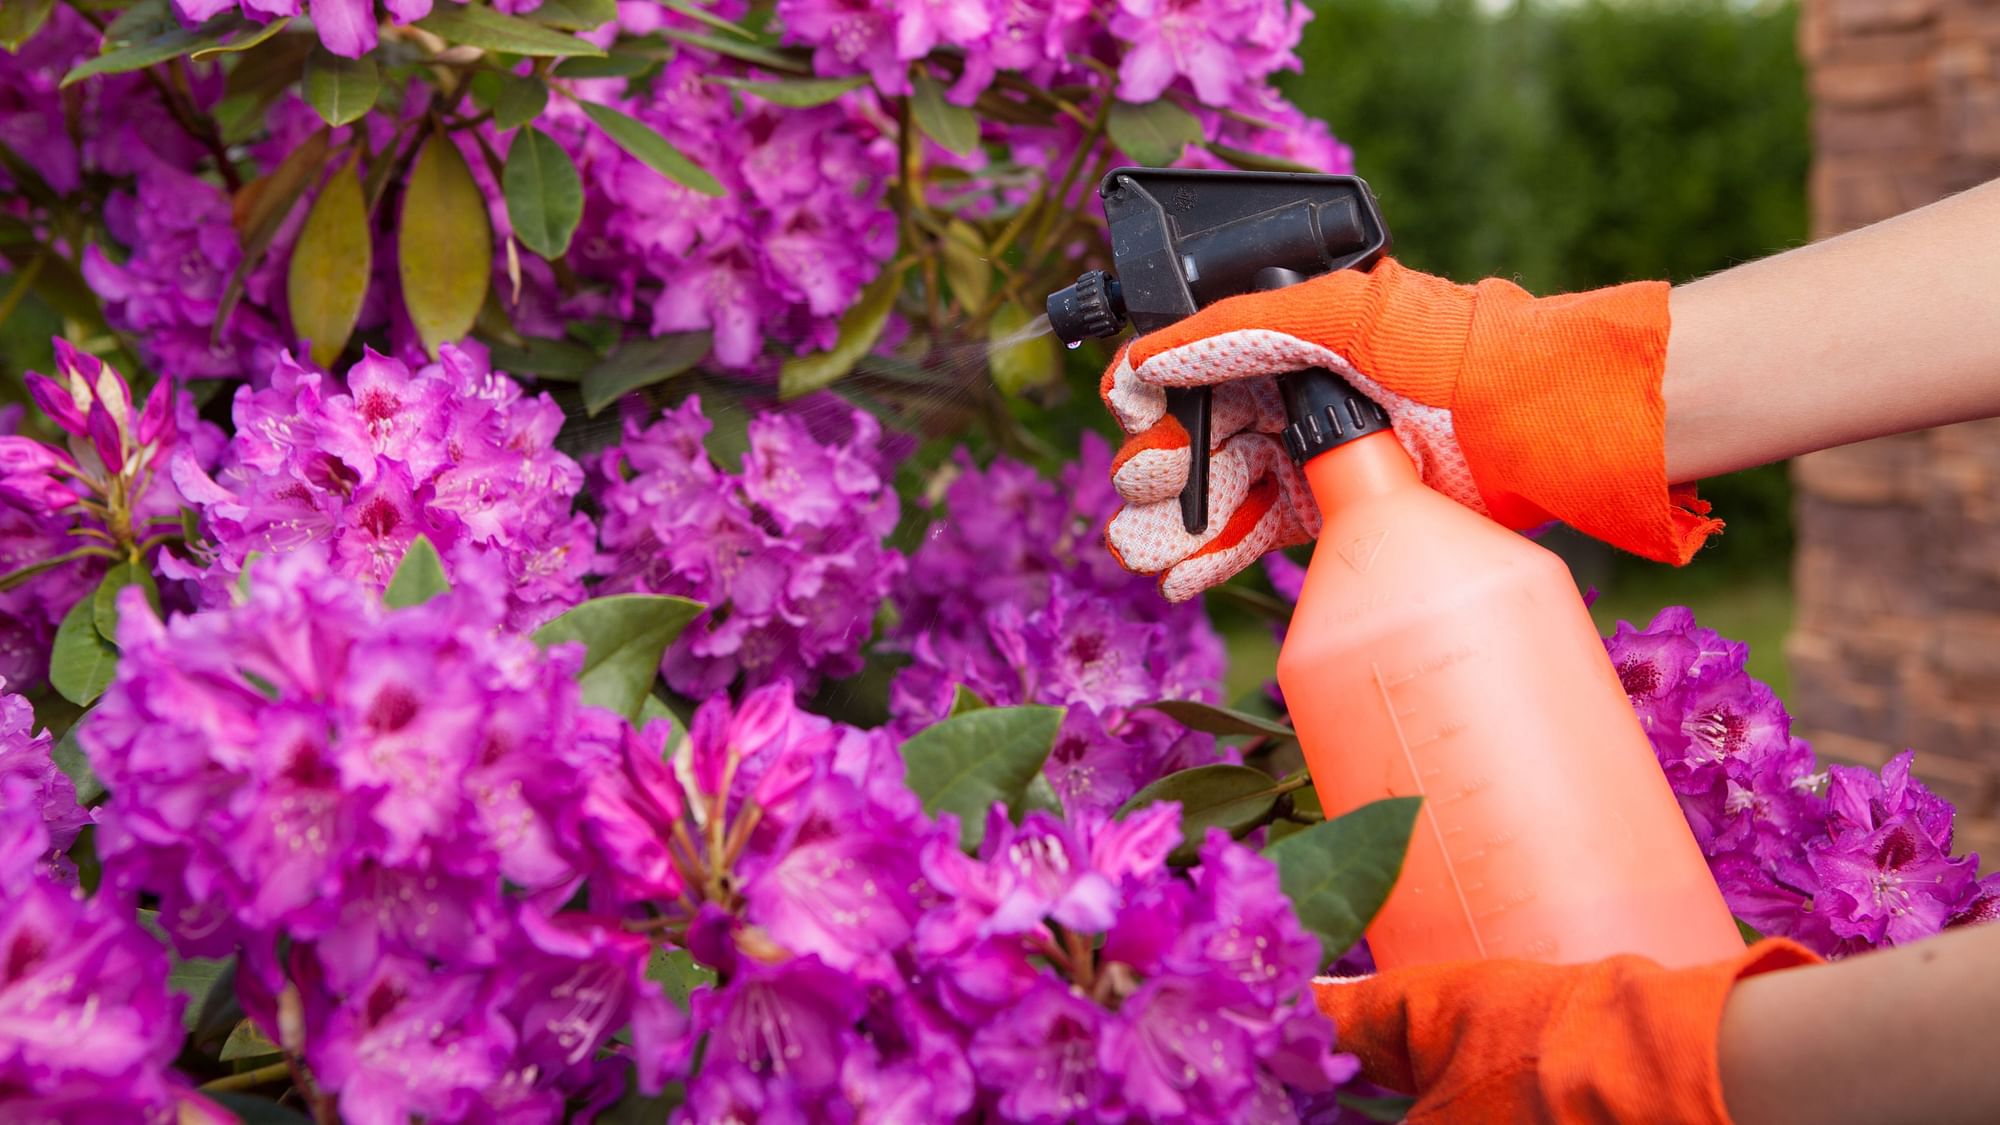 Heightened pesticide spraying around the Mother’s Day flower harvest was resulting in a higher BP for children.